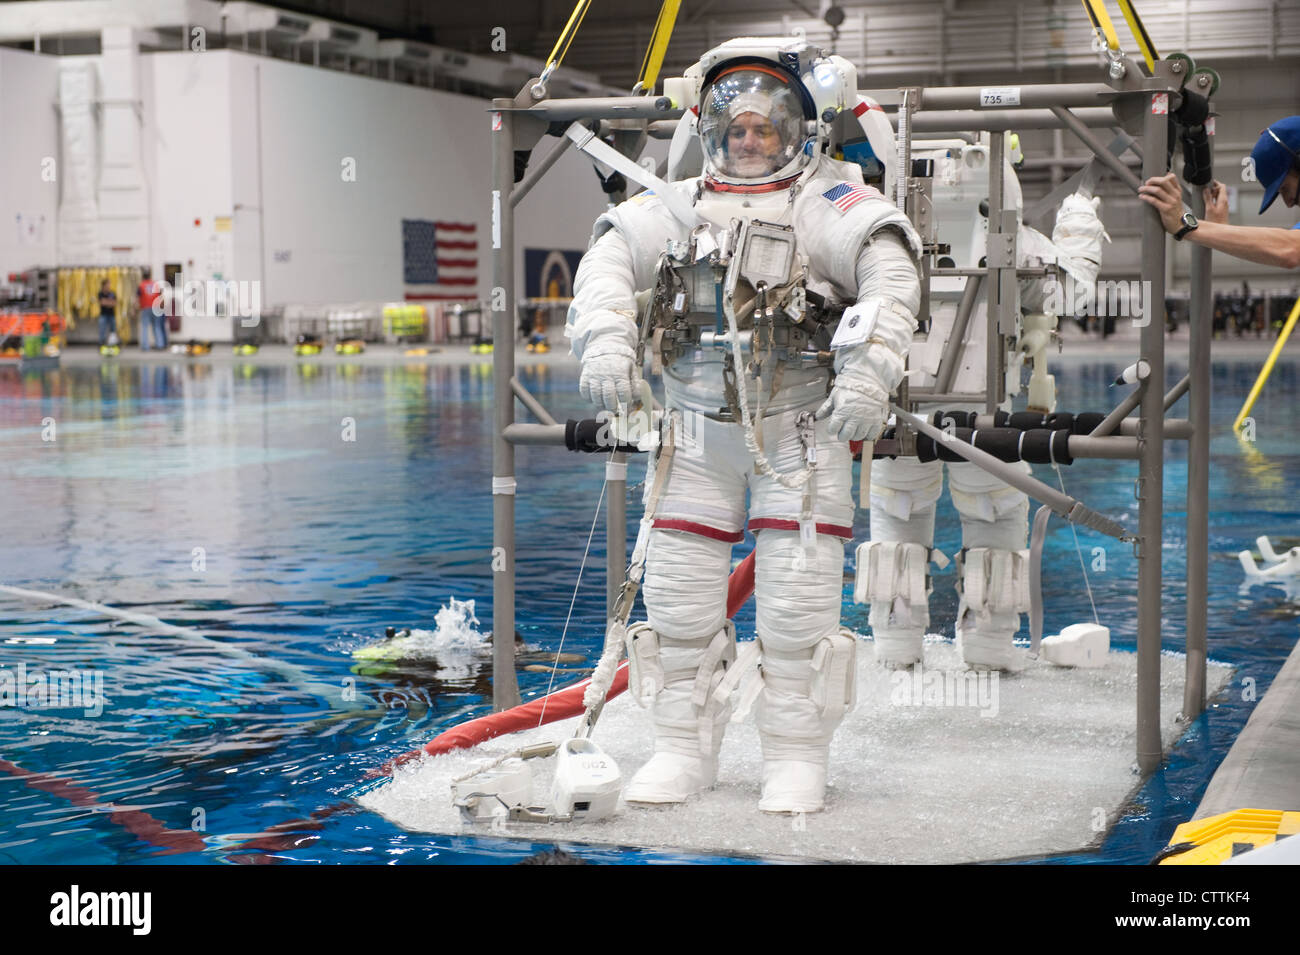 Attired in training versions of their Extravehicular Mobility Unit (EMU) spacesuits, NASA astronauts Rex Walheim and Sandy Magnus (partially obscured), both STS-135 mission specialists, are about to be submerged in the waters of the Neutral Buoyancy Laboratory (NBL) near NASA's Johnson Space Center. Divers are in the water to assist Walheim and Magnus in their rehearsal, which is intended to help prepare them for work on the exterior of the International Space Station. STS-135 is planned to be the final mission of the space shuttle program. Stock Photo